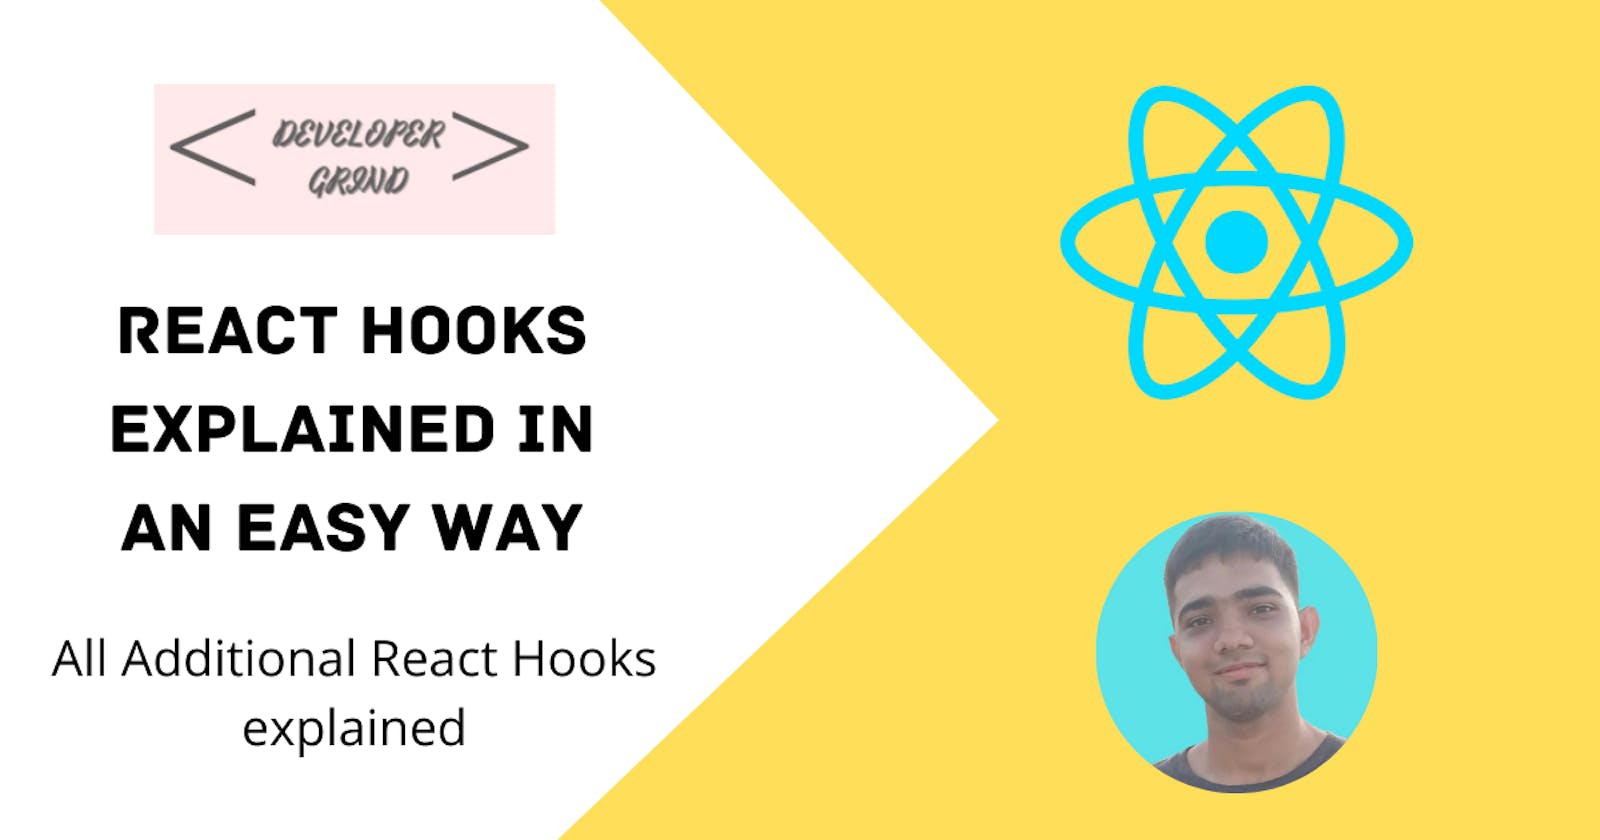 All Additional React Hooks explained in an easy way